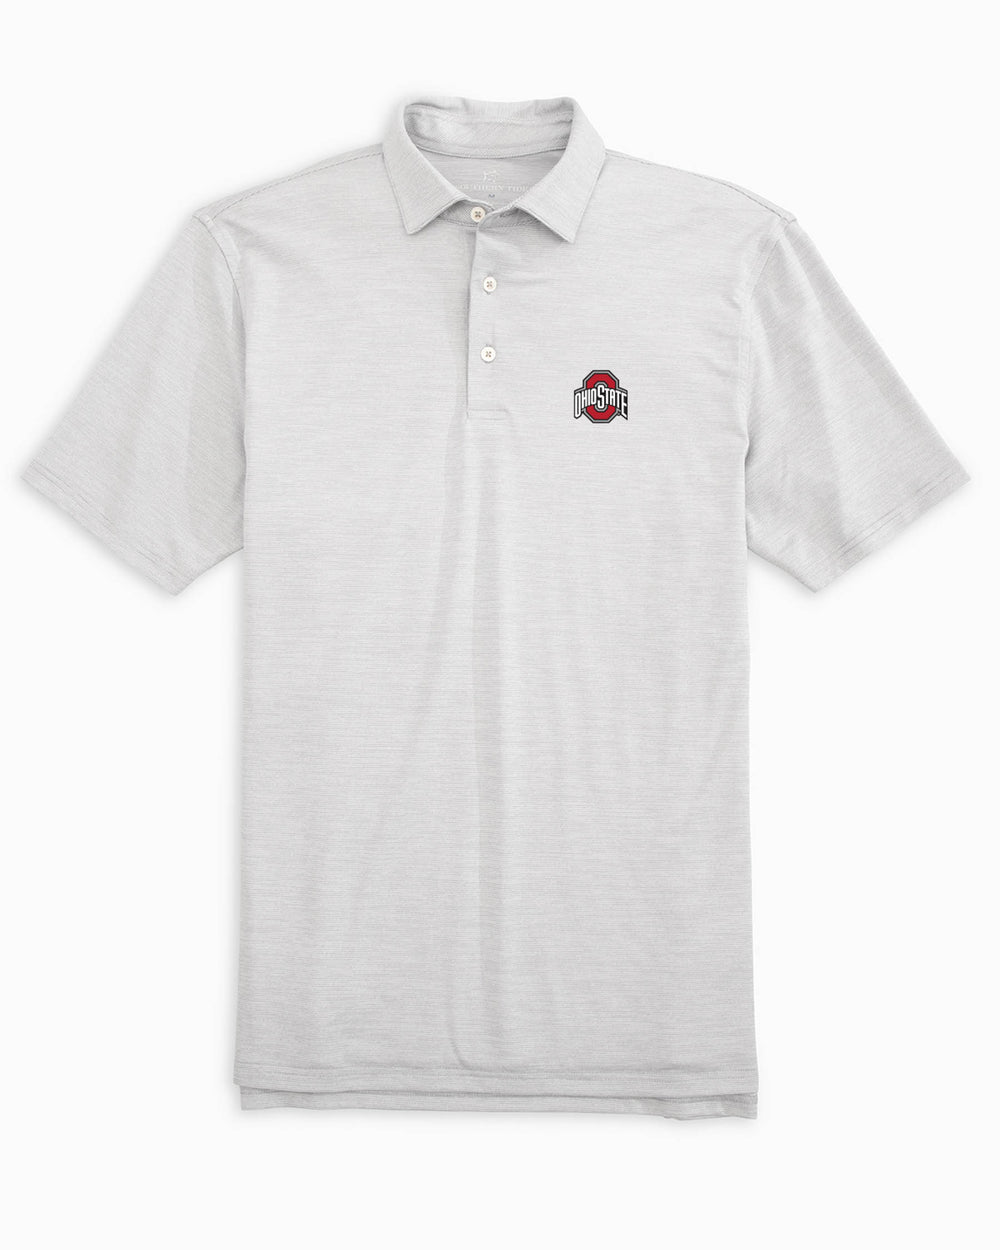 The front of the Ohio State Buckeyes Driver Spacedye Polo Shirt by Southern Tide - Slate Grey